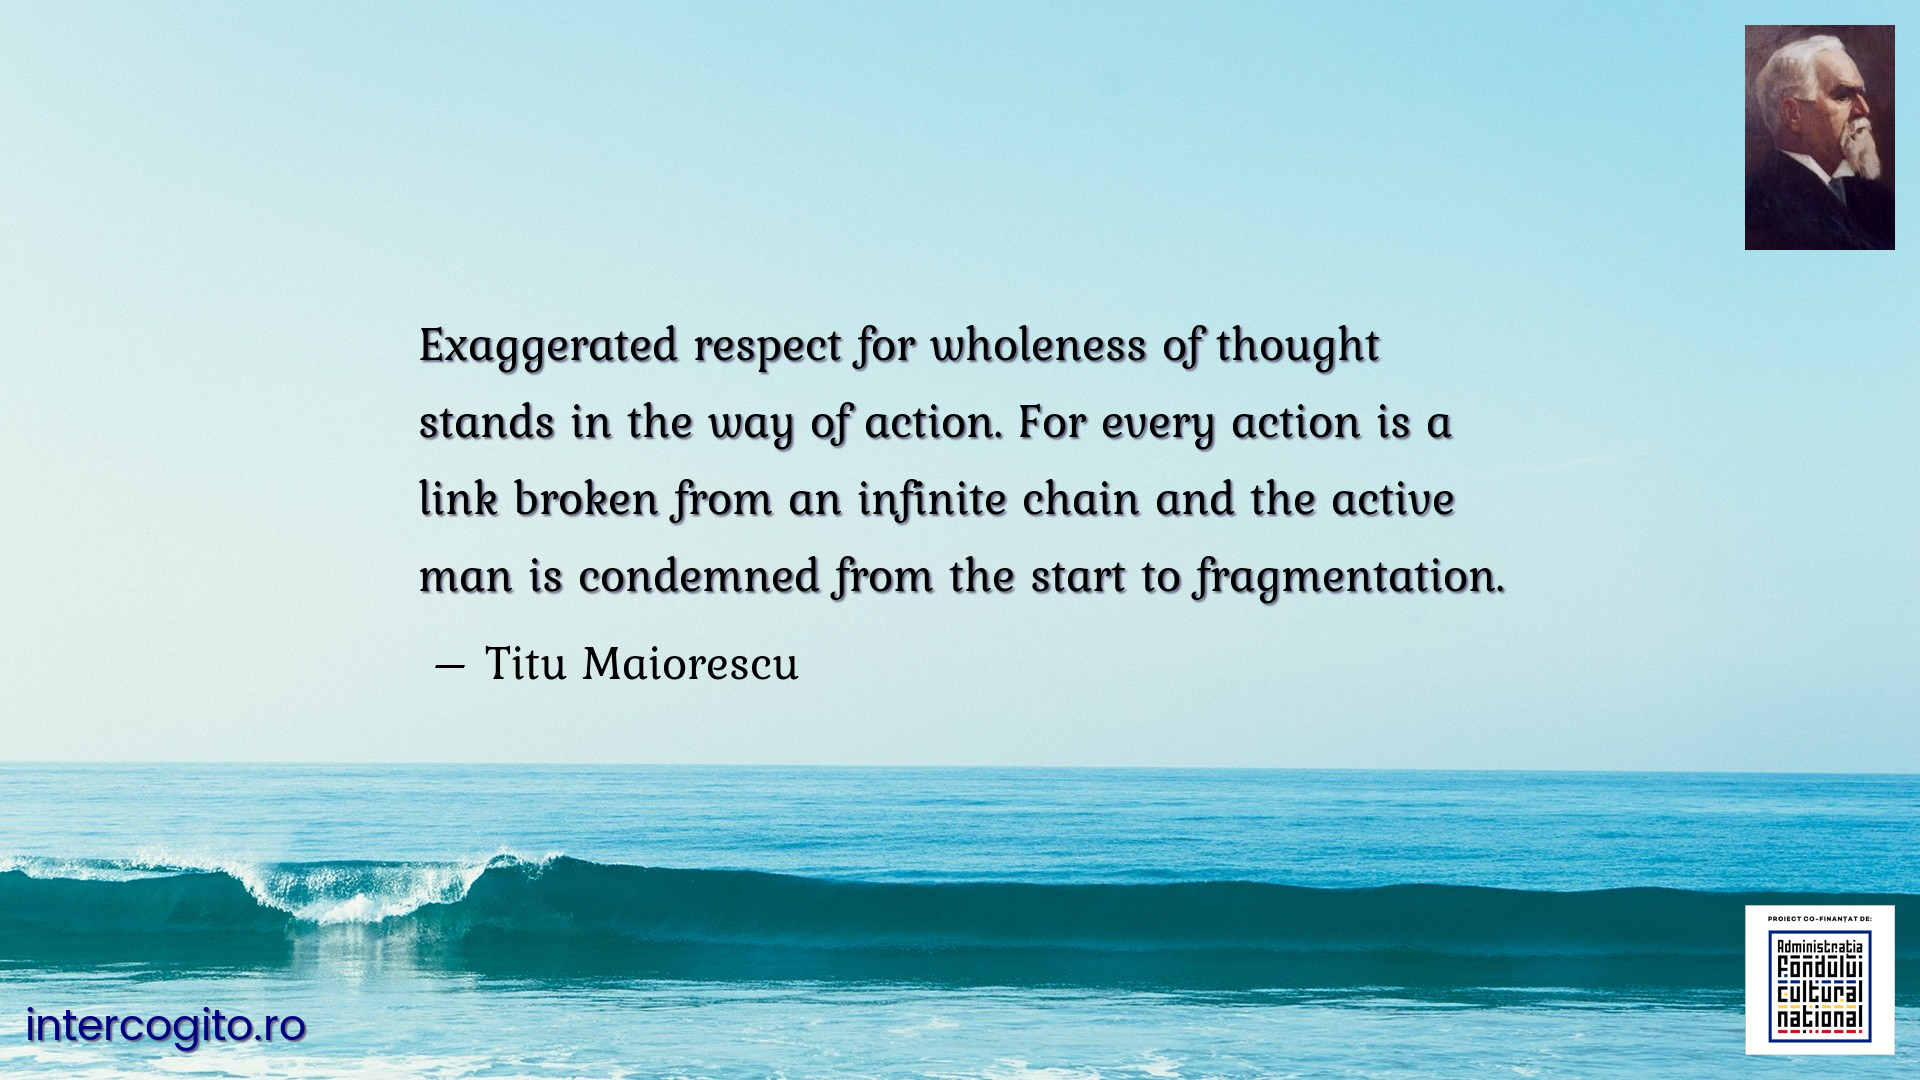 Exaggerated respect for wholeness of thought stands in the way of action. For every action is a link broken from an infinite chain and the active man is condemned from the start to fragmentation.